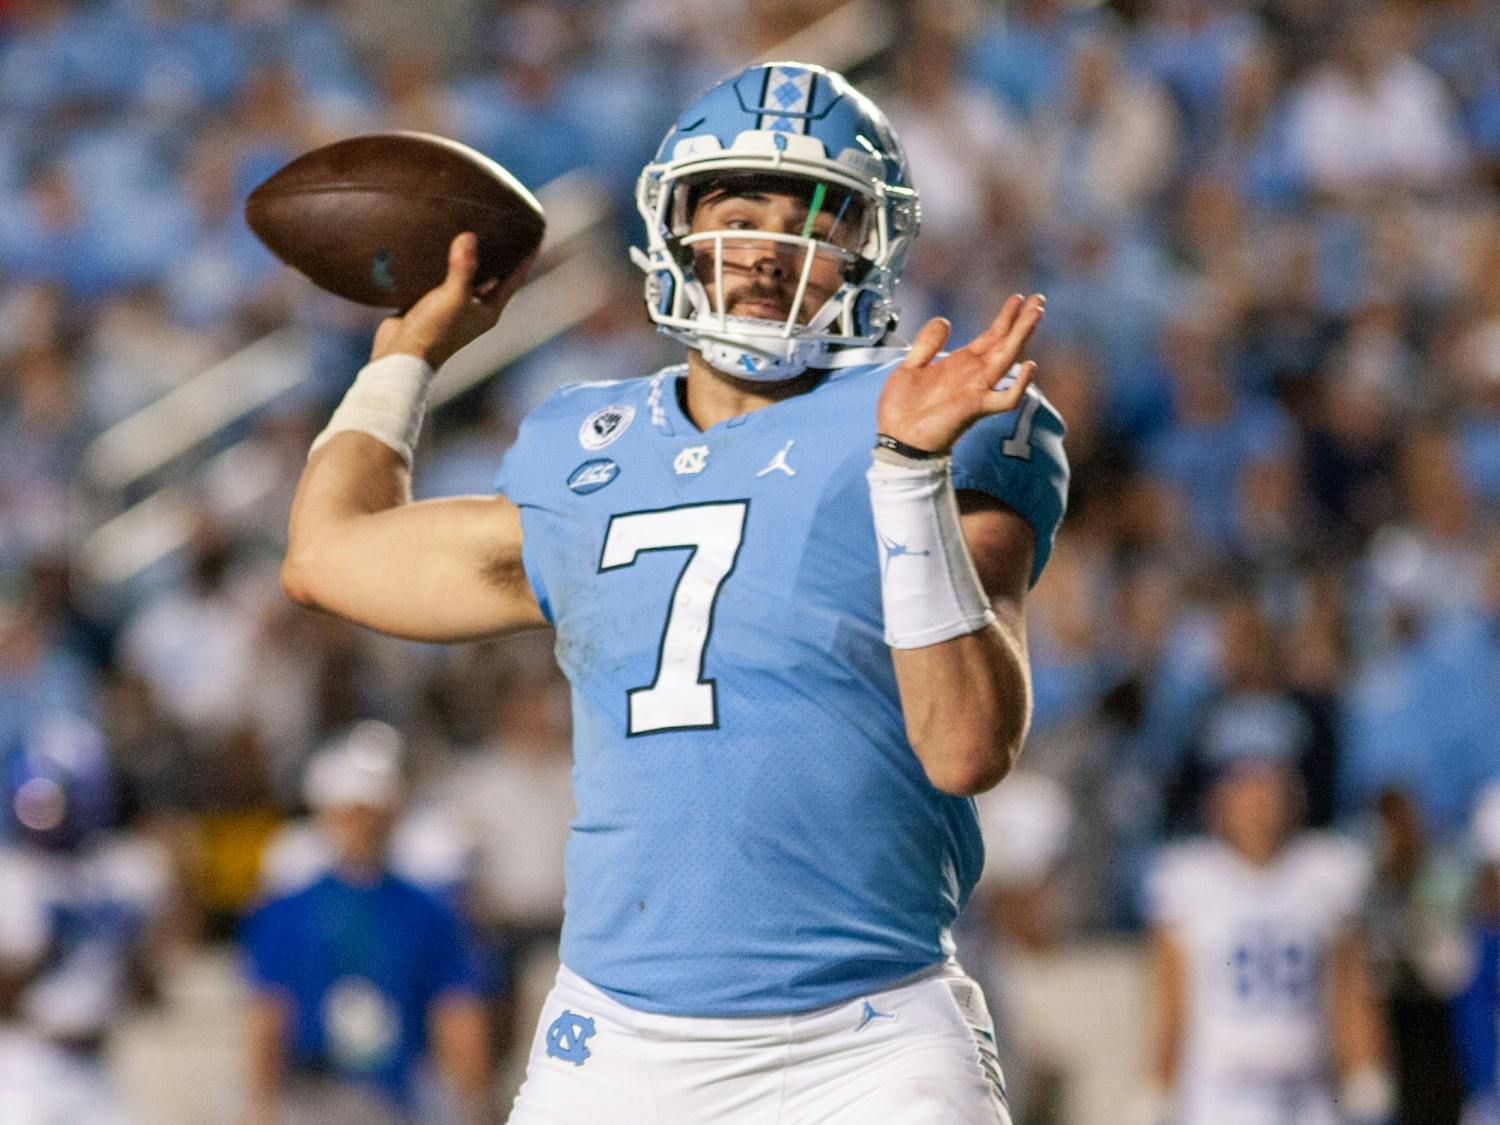 UNC junior quarterback Sam Howell (7) throws the ball at the game against Georgia State on Sept. 11 at Kenan Stadium. UNC won 59-17.